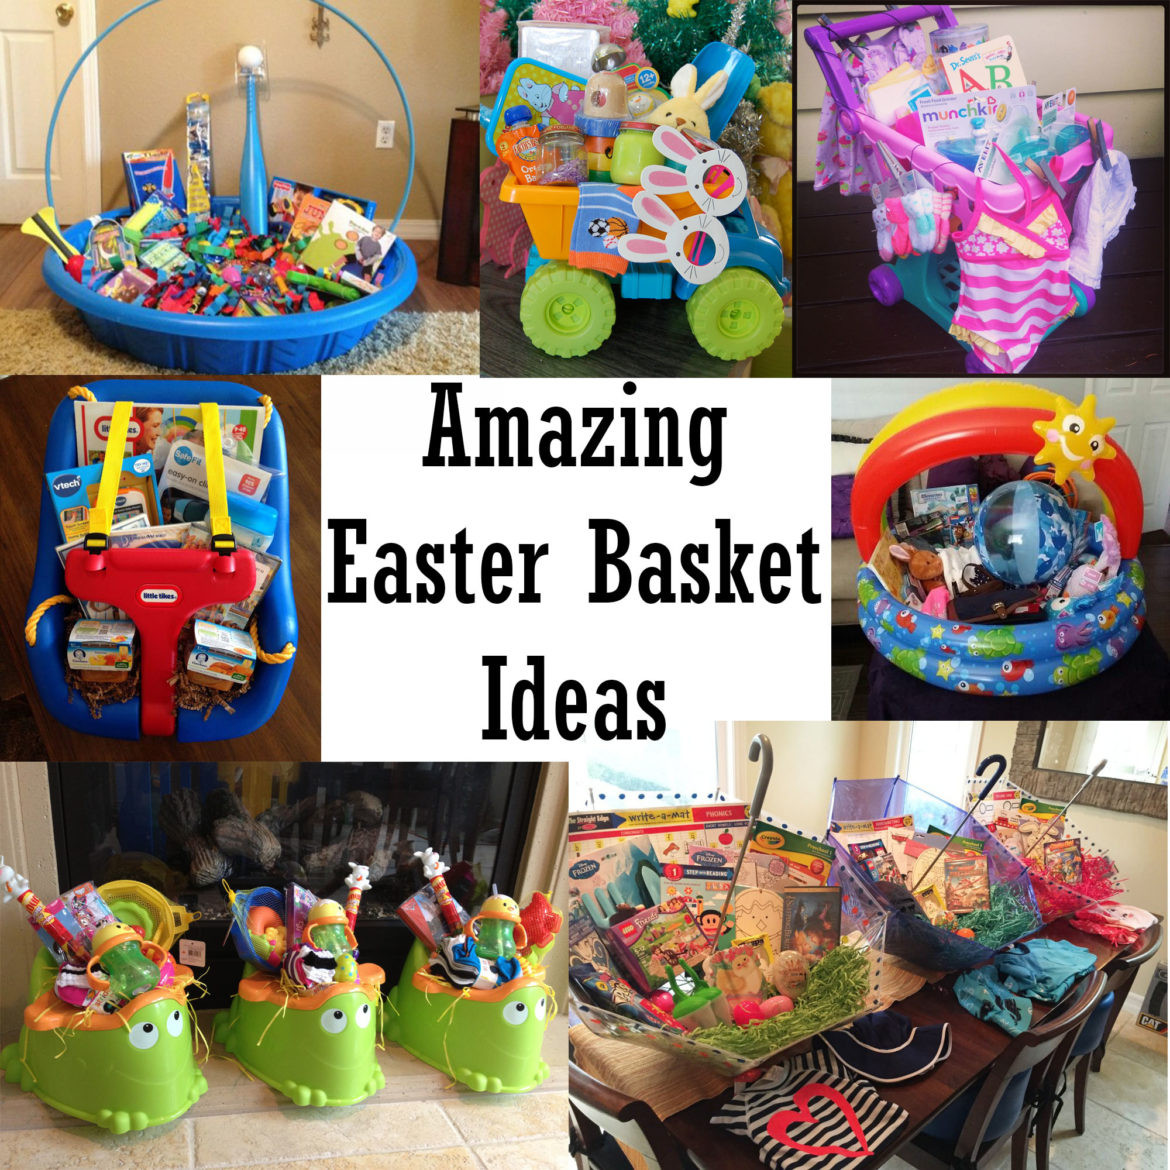 Fun Easter Basket Ideas
 Amazing Easter Basket Ideas The Keeper of the Cheerios